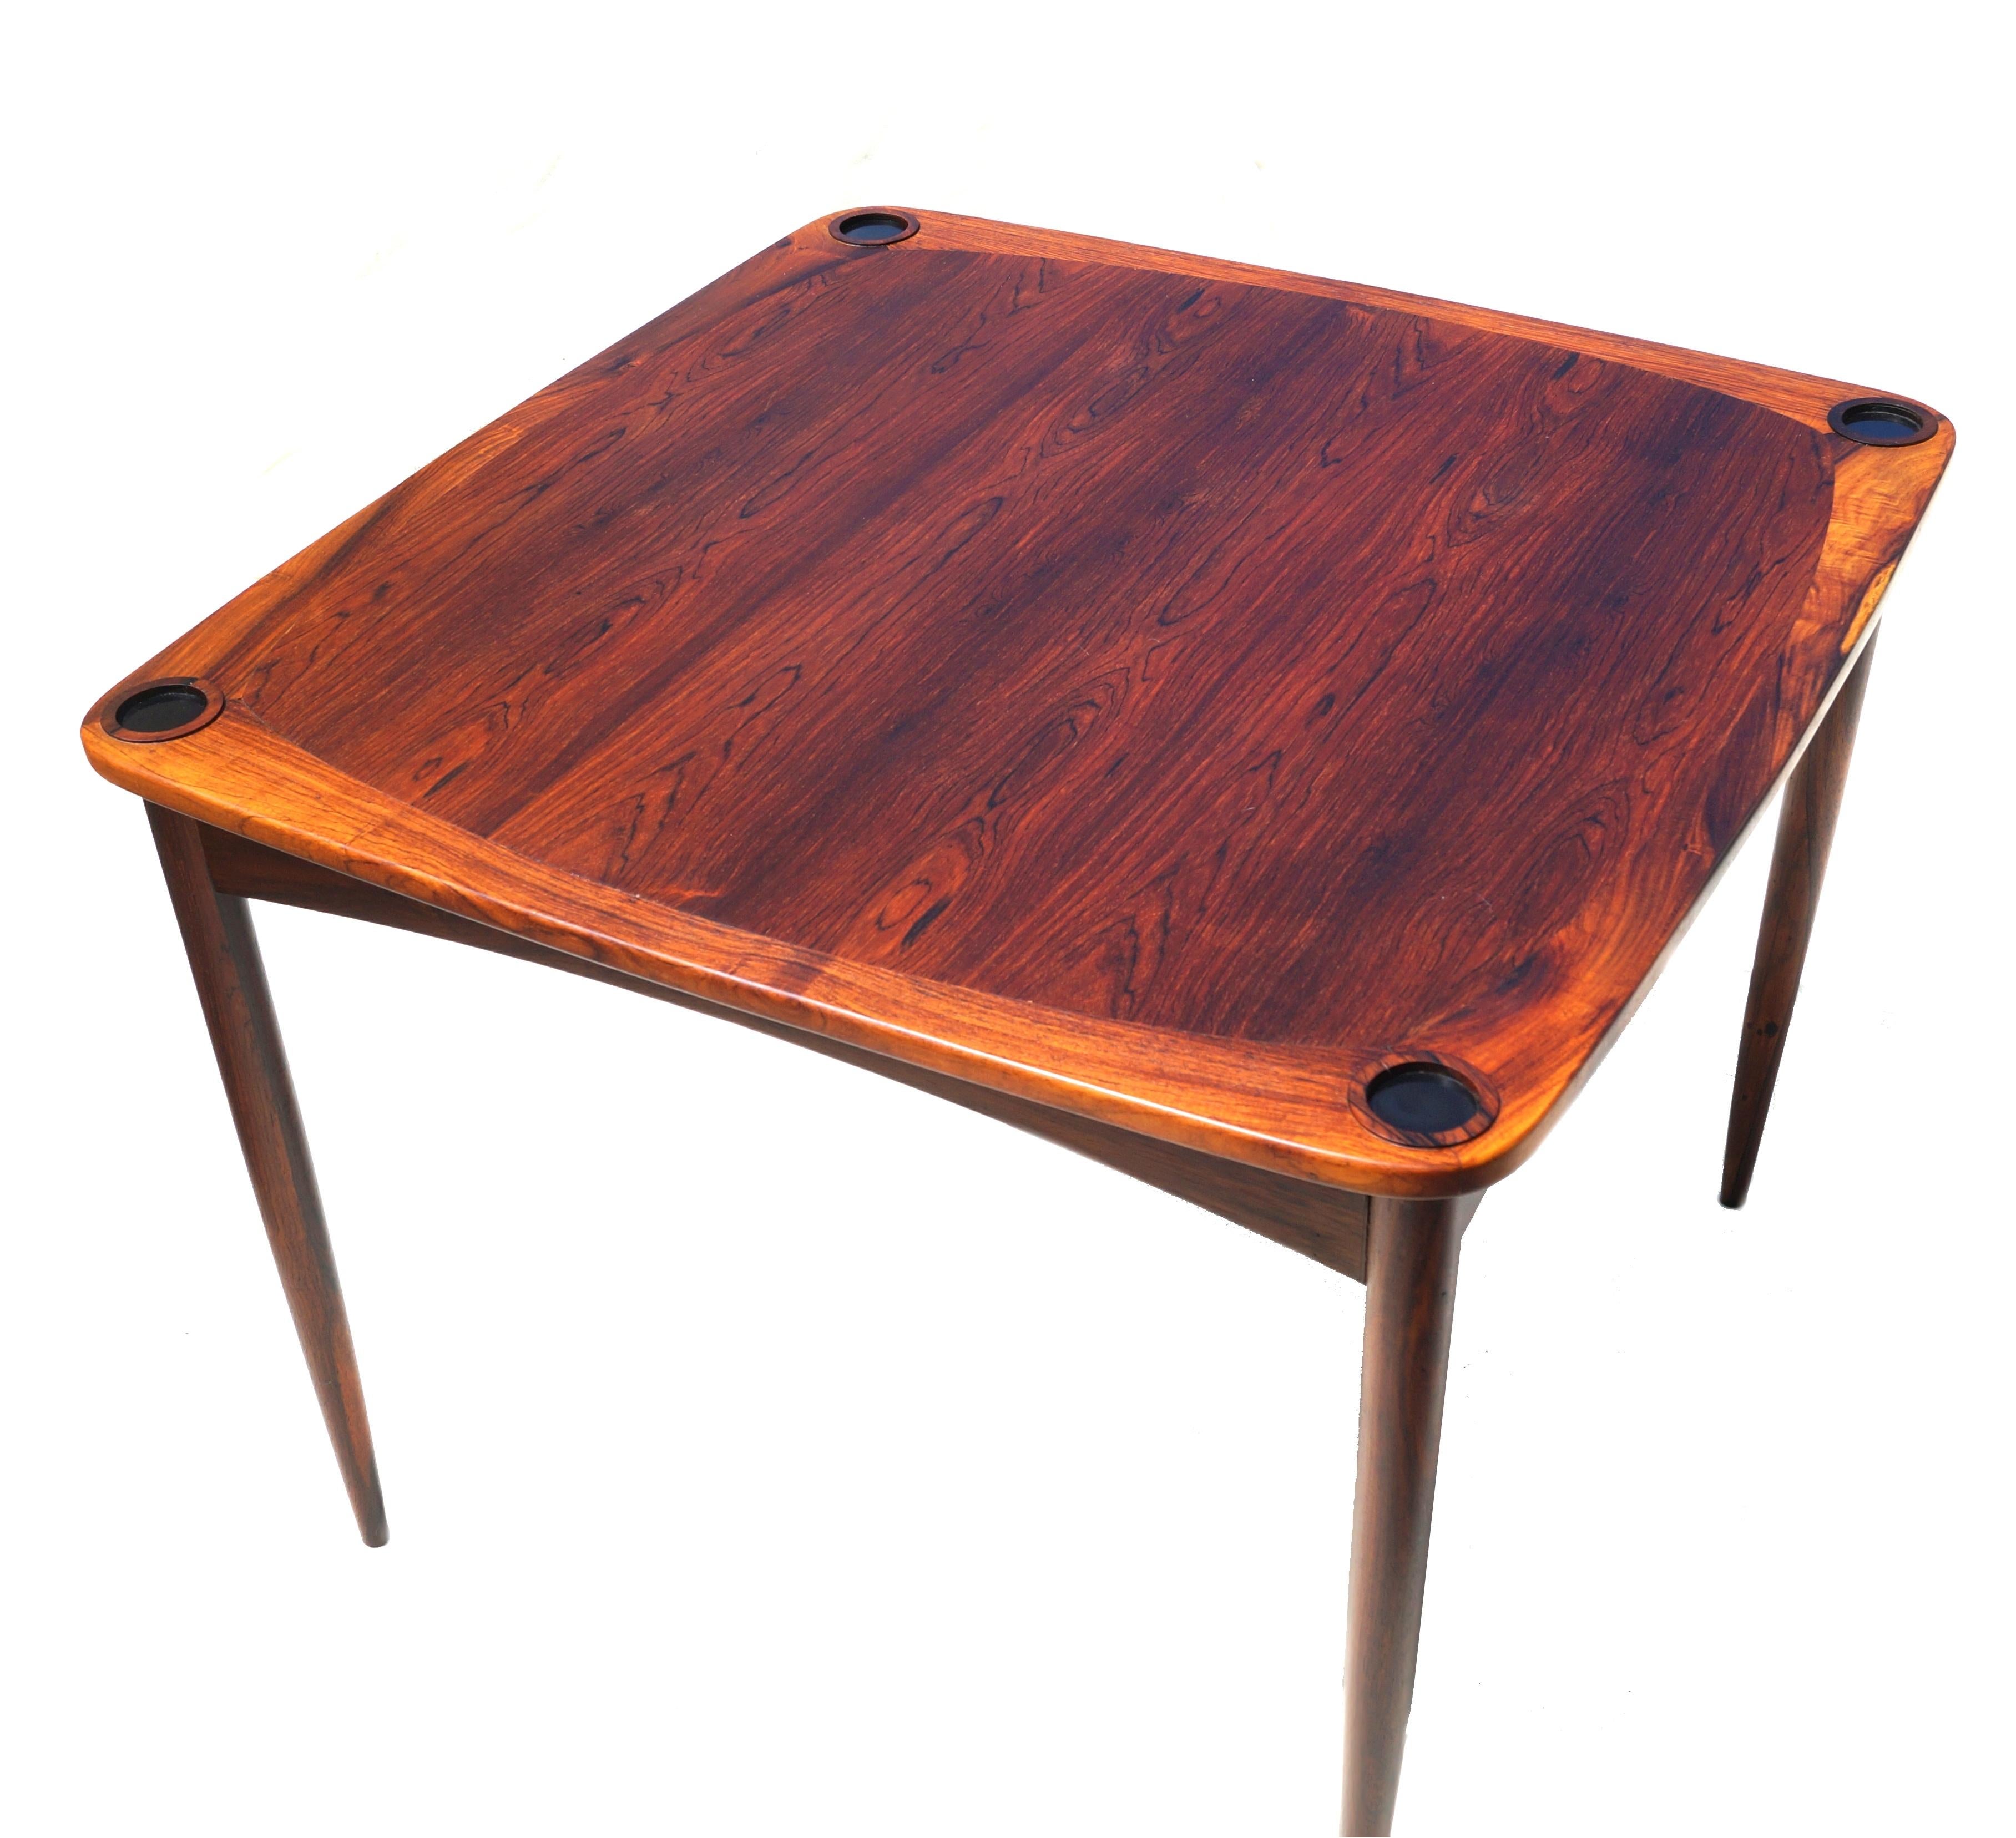 Mid-Century Modern rosewood game table ' Mesa Norma ' with four inset drink holders and reversible top to felt, by Sergio Rodrigues.  This Item may only be shipped within the USA .